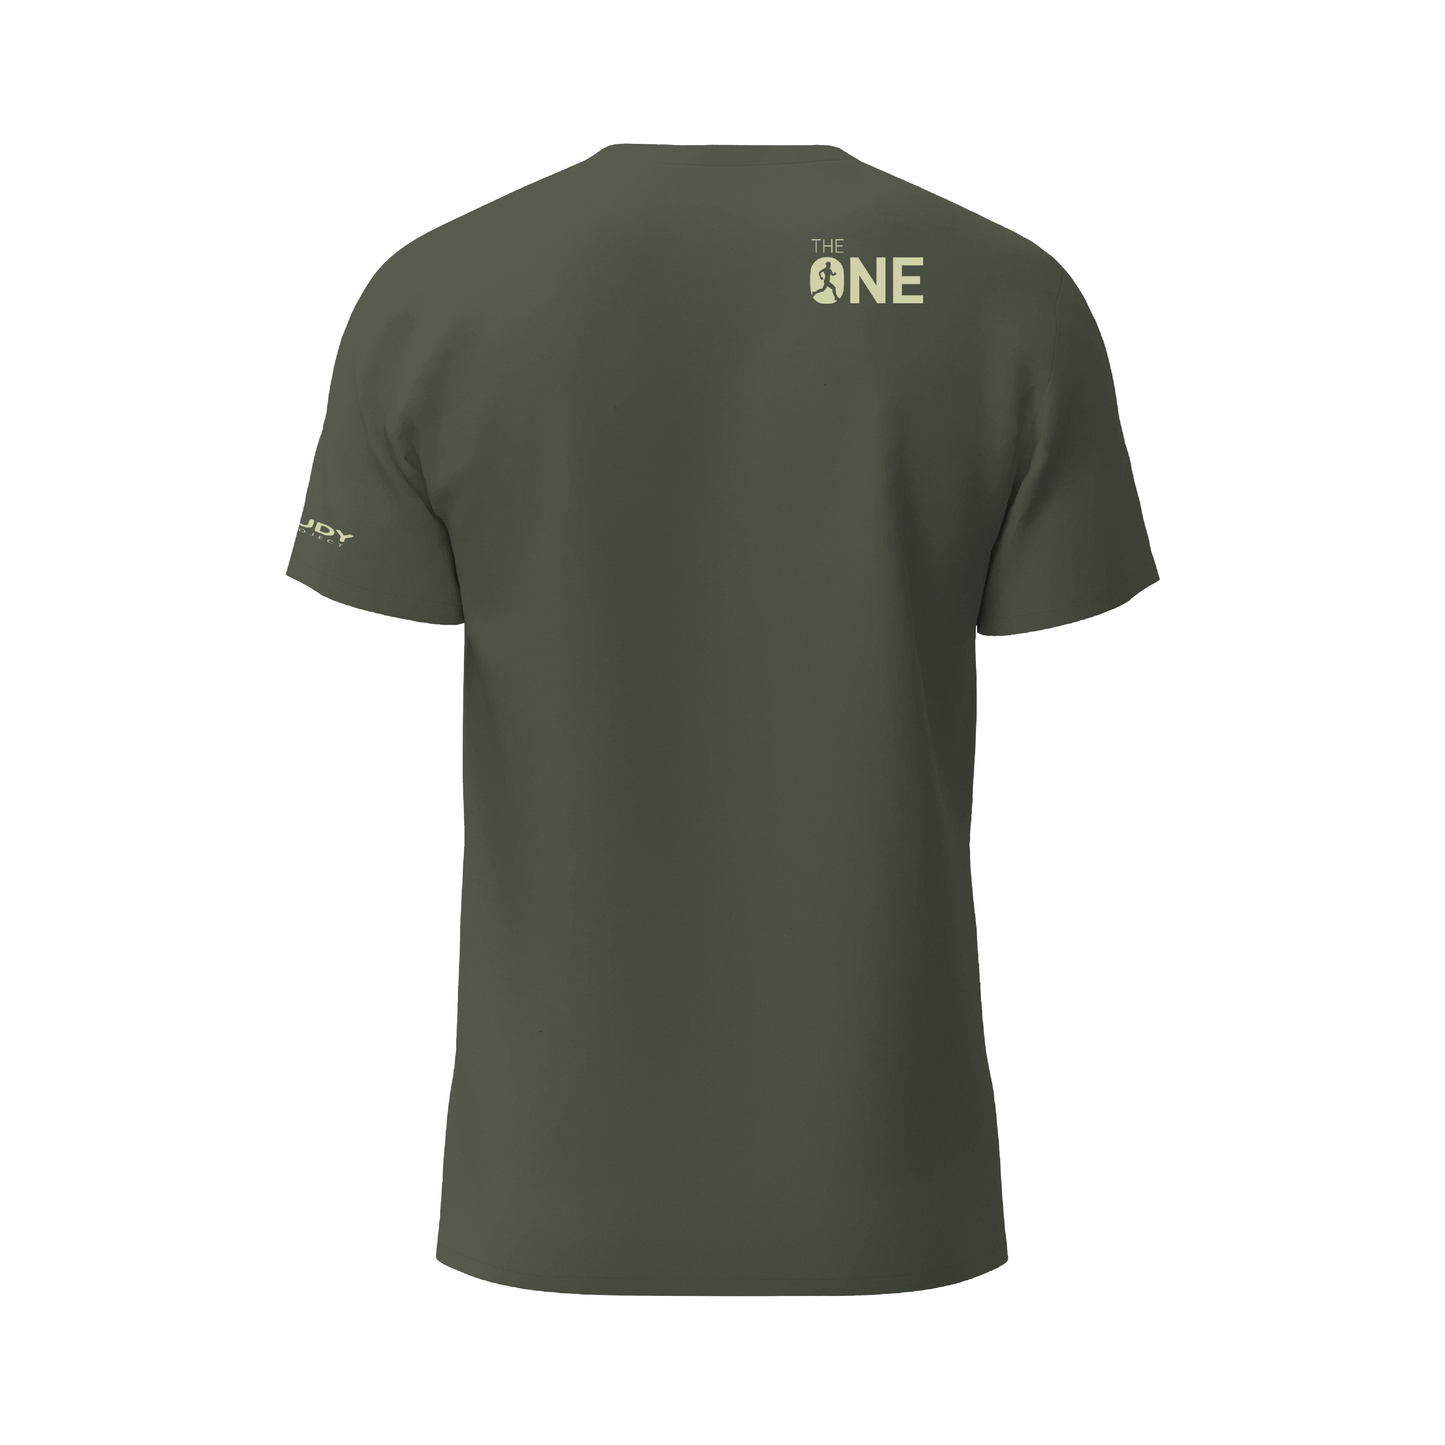 #RunTheOne Active Tee in Olive Green